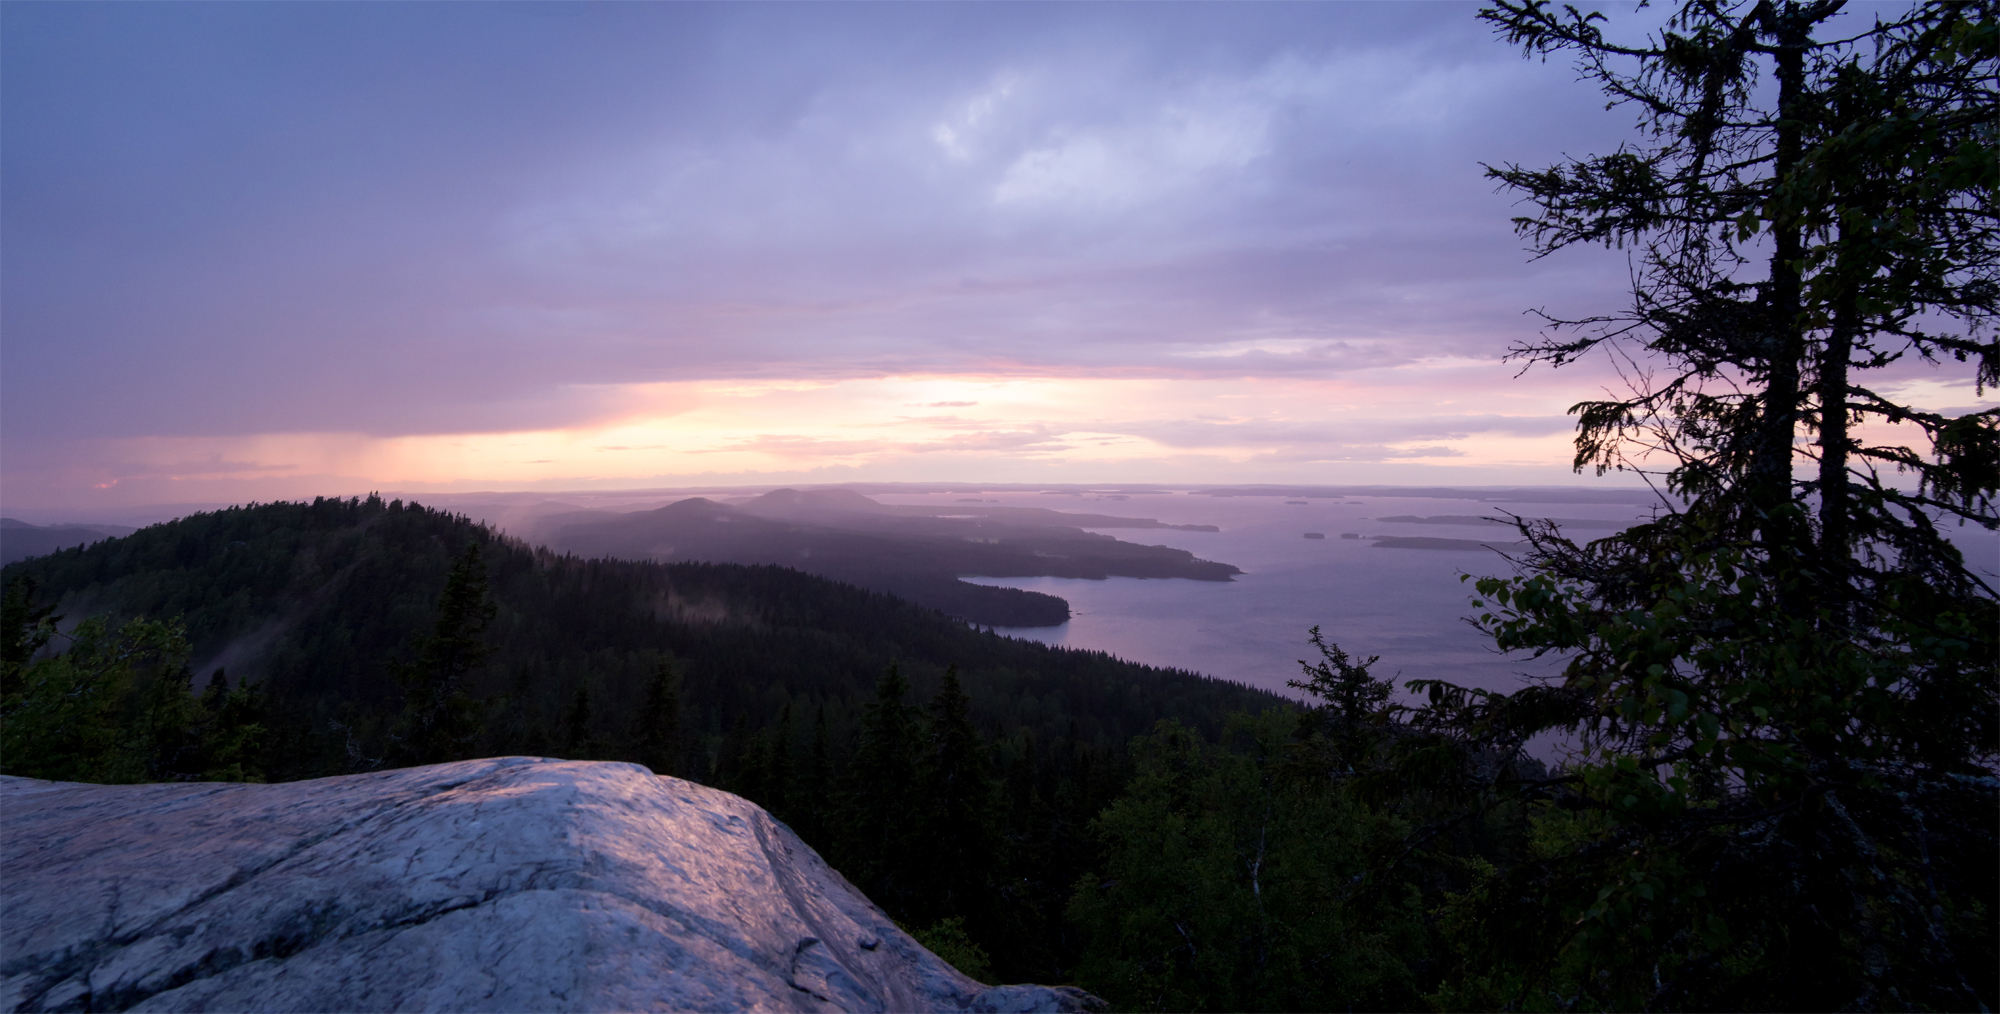 Koli national park is one of the most mythical places in all of Finland